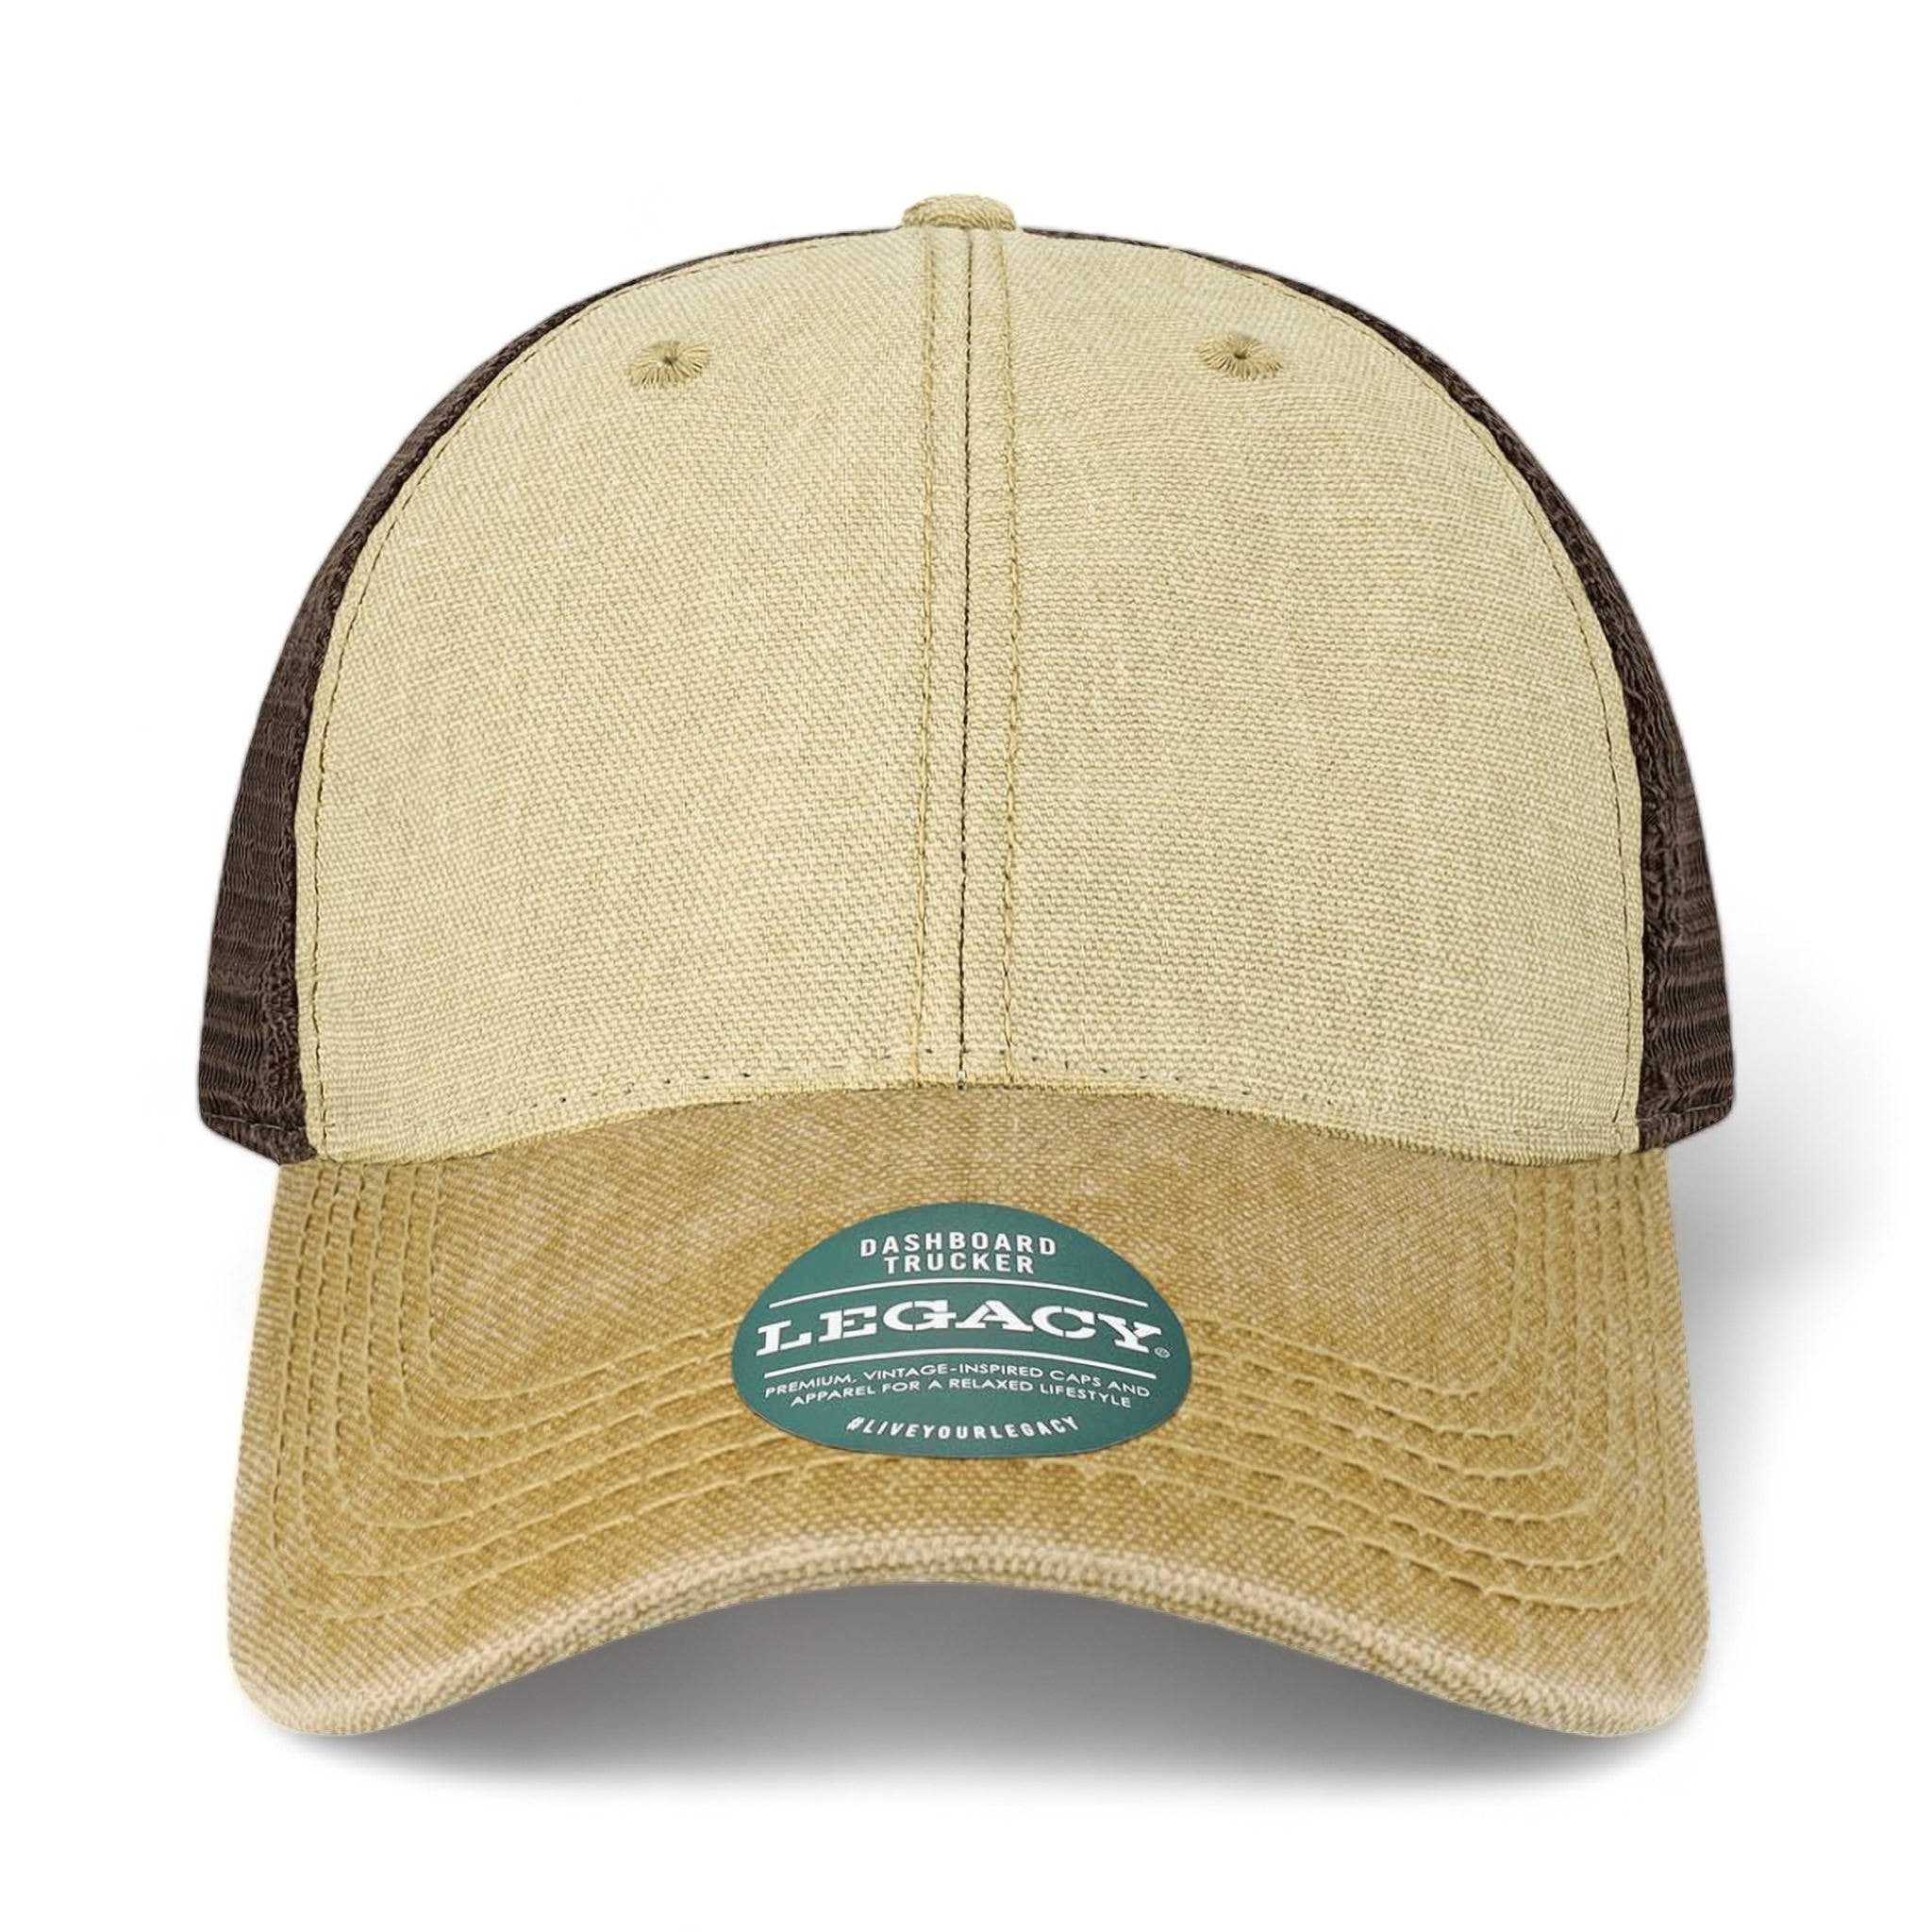 Front view of LEGACY DTA custom hat in stone, camel and brown